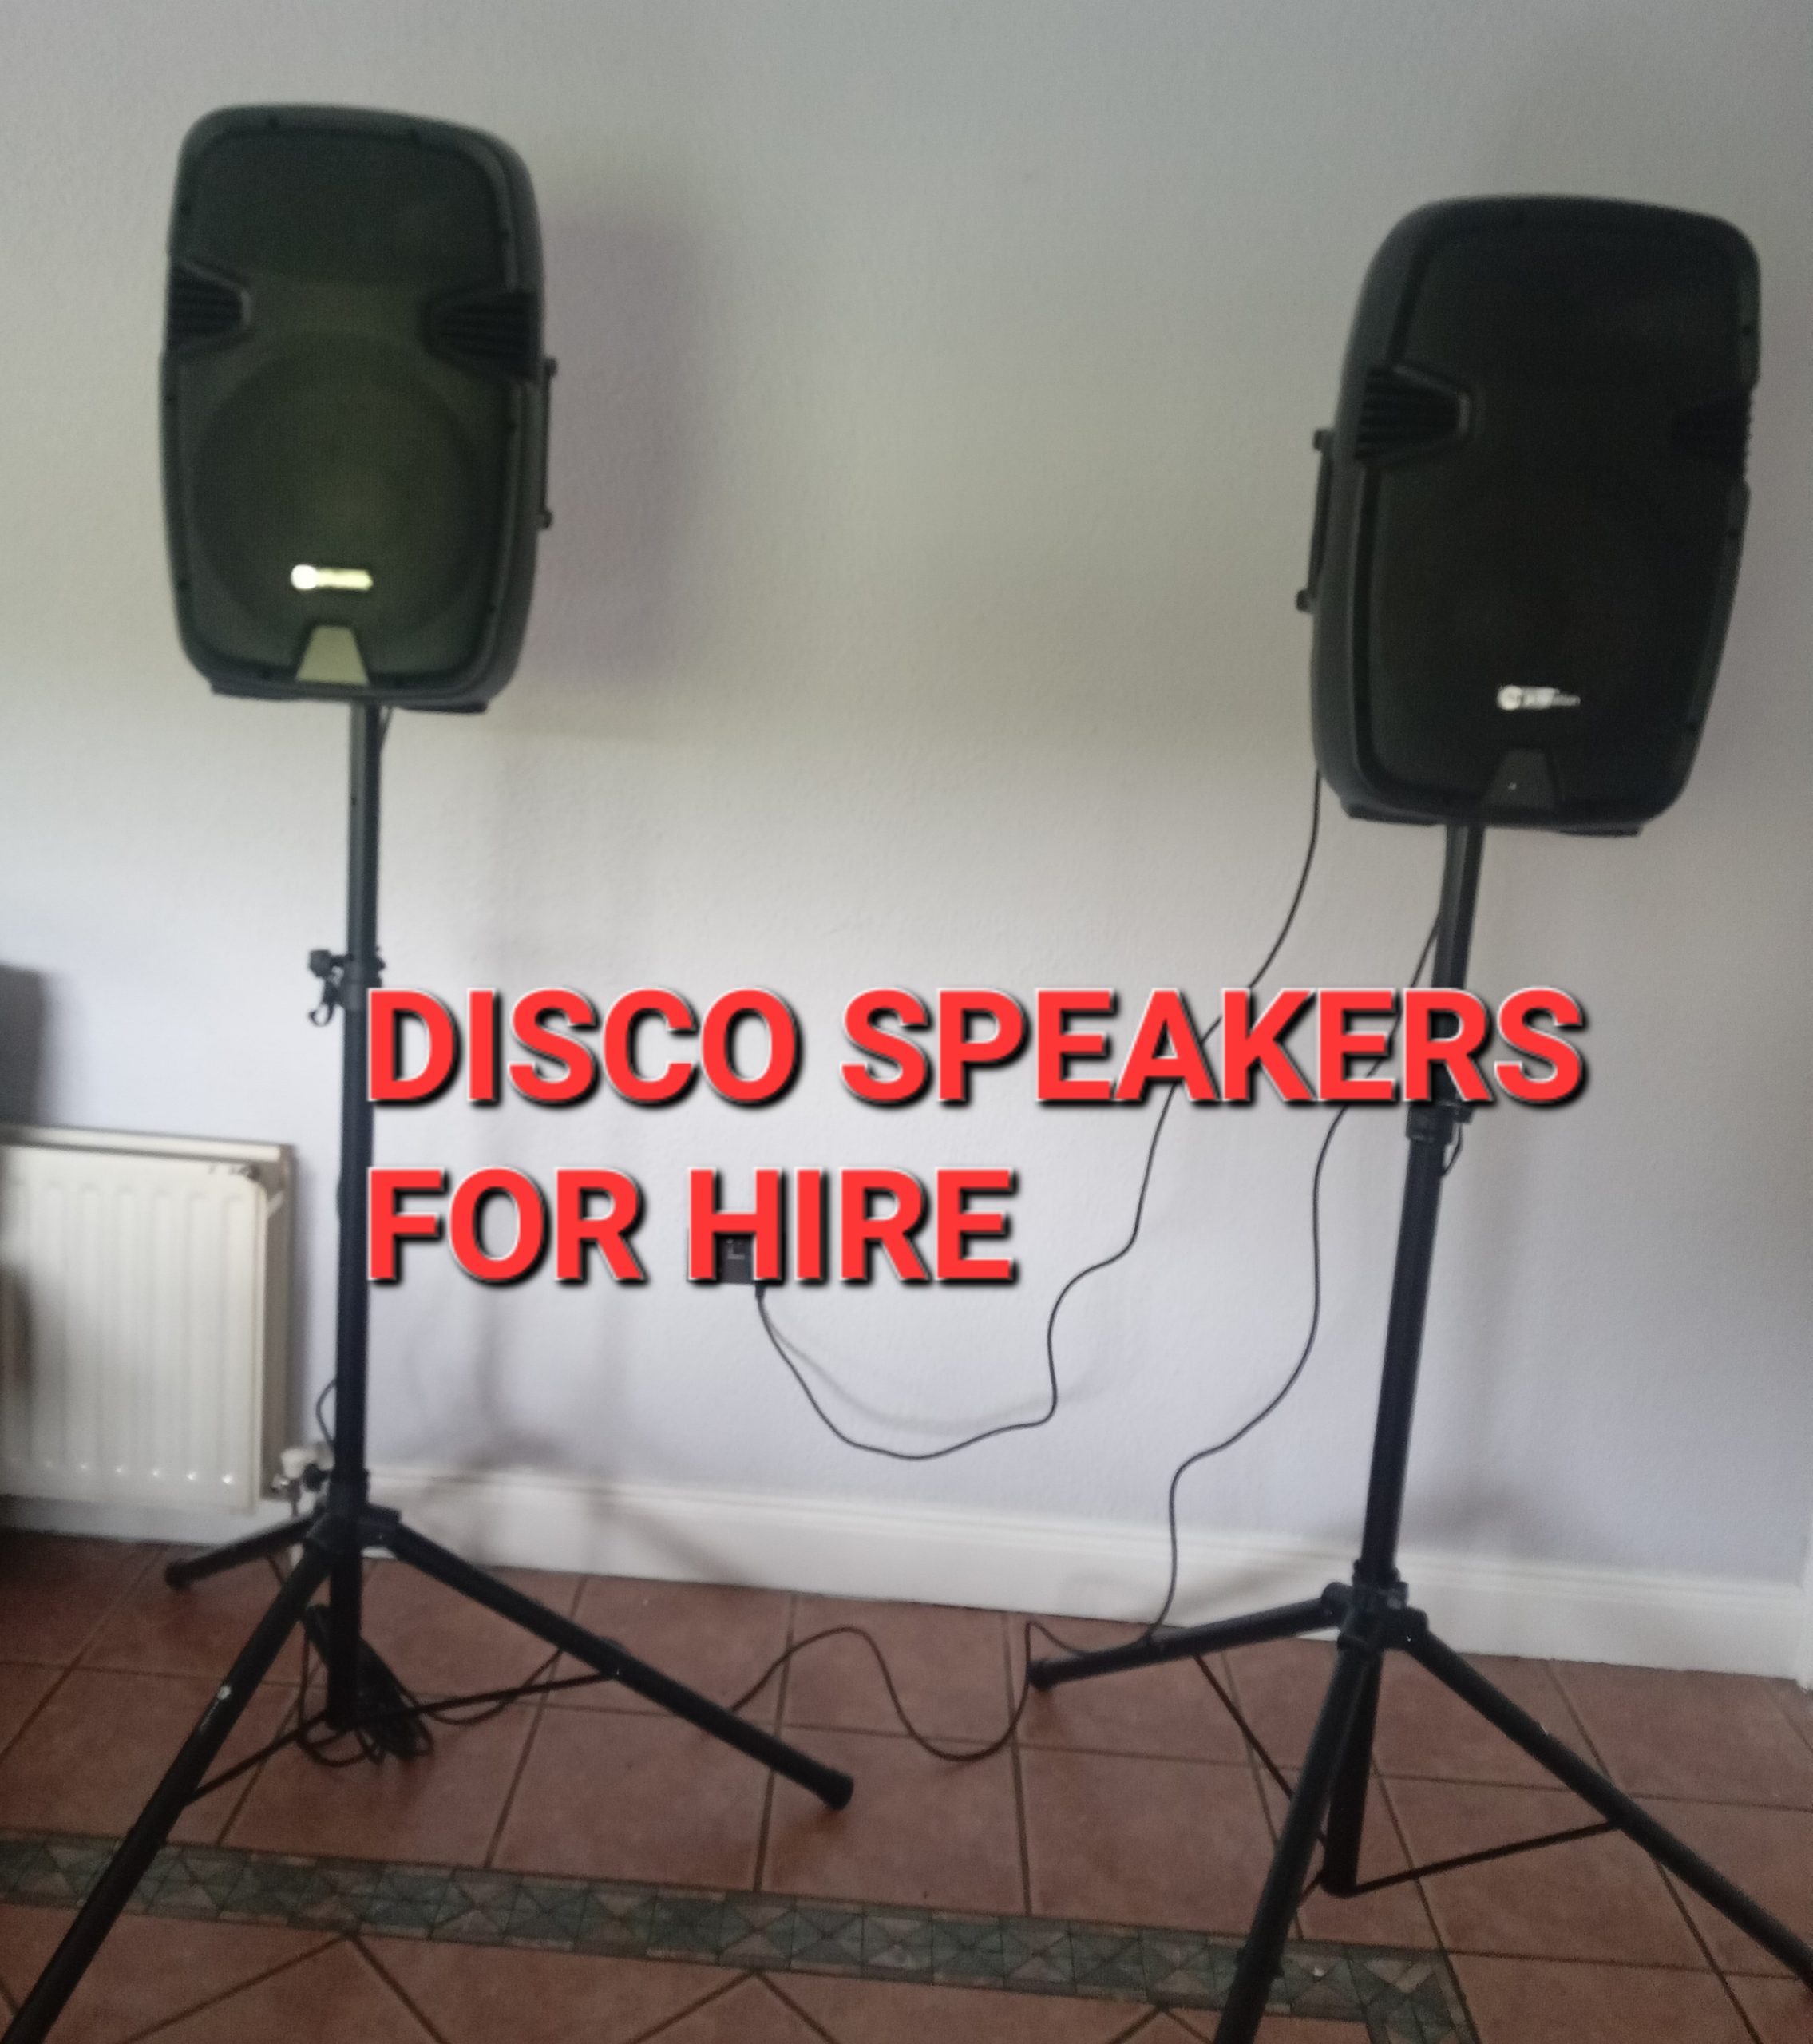 BLUETOOTH DISCO SPEAKER FOR HIRE